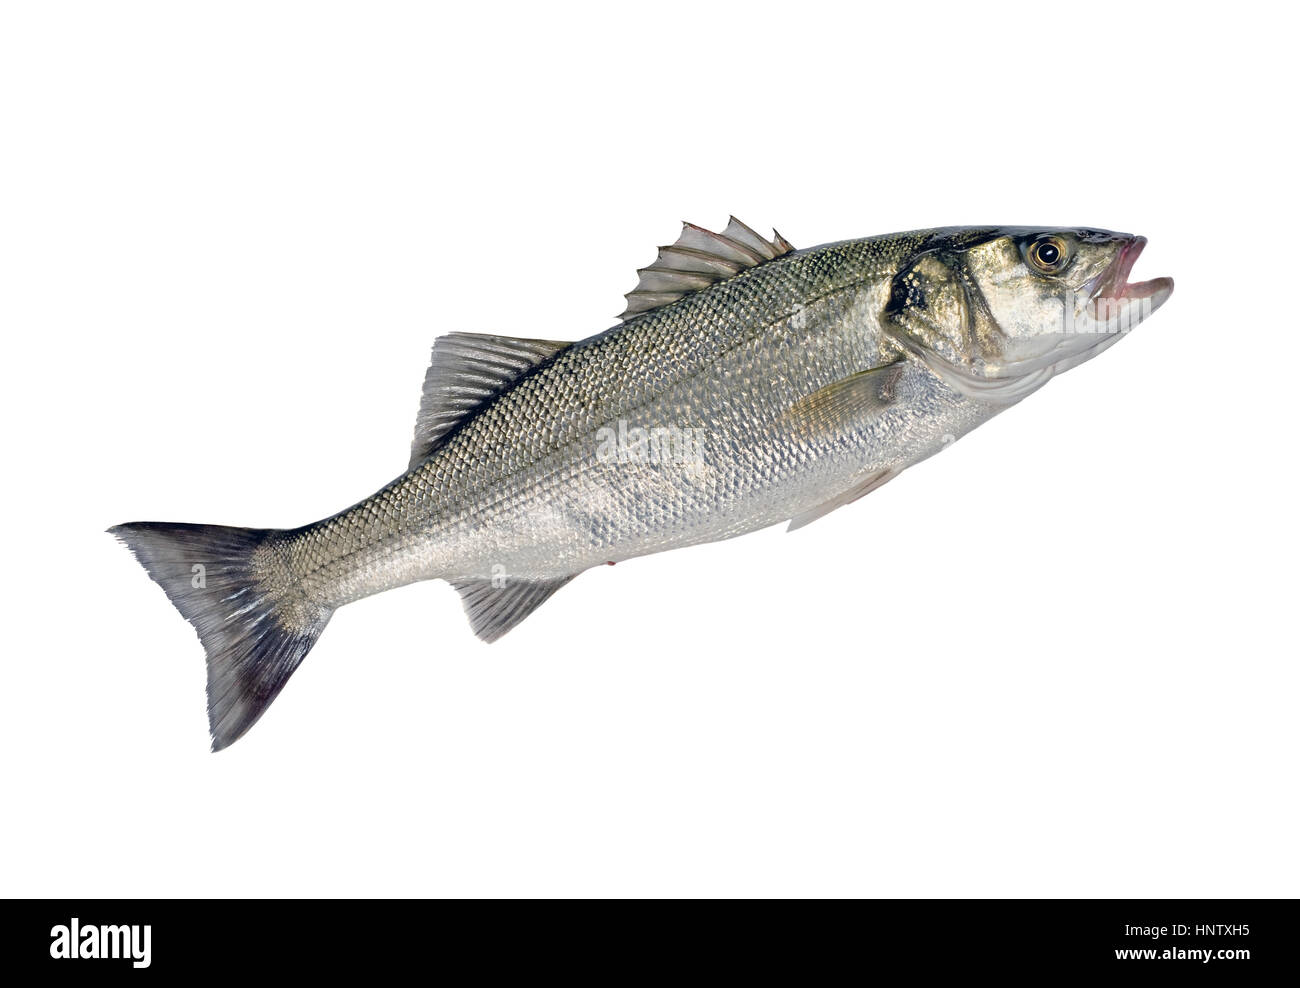 Fresh Whole Sea Bass Fish (Dicentrarchus labrax) Isolated on White Background Stock Photo